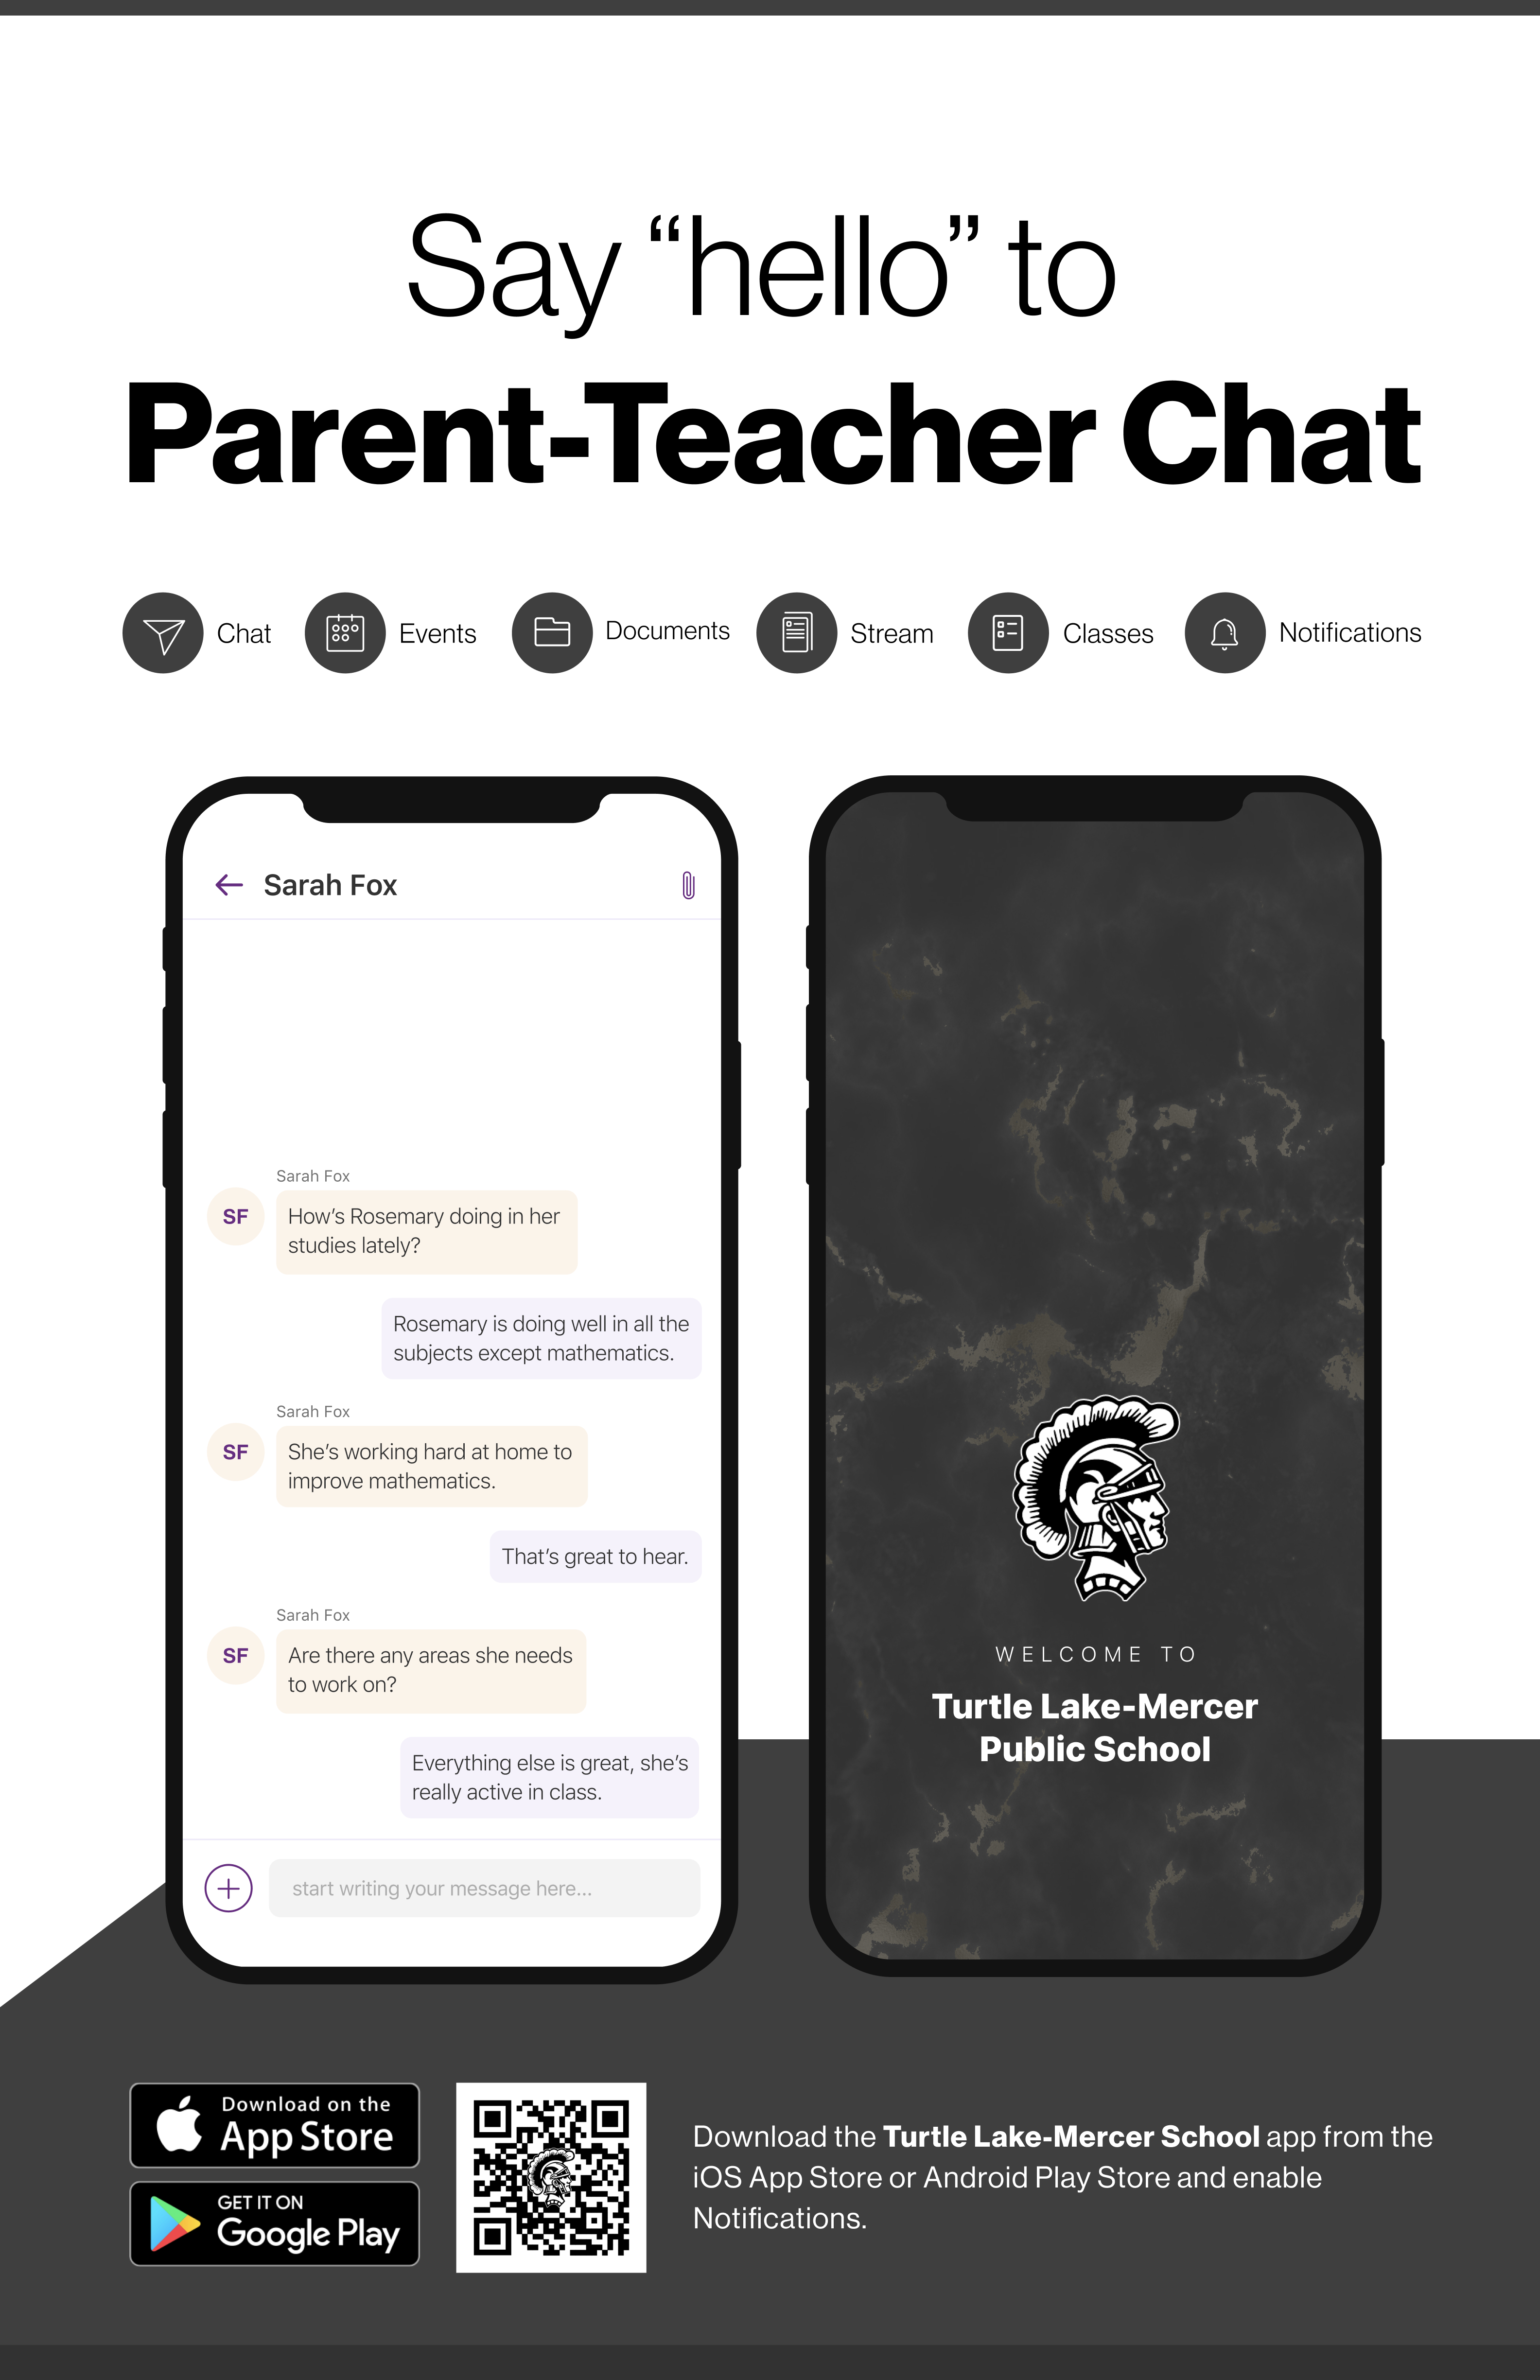 Say hello to Parent-Teacher chat in the new Rooms app. Download the Turtle Lake-Mercer app in the Google Play or Apple App store.